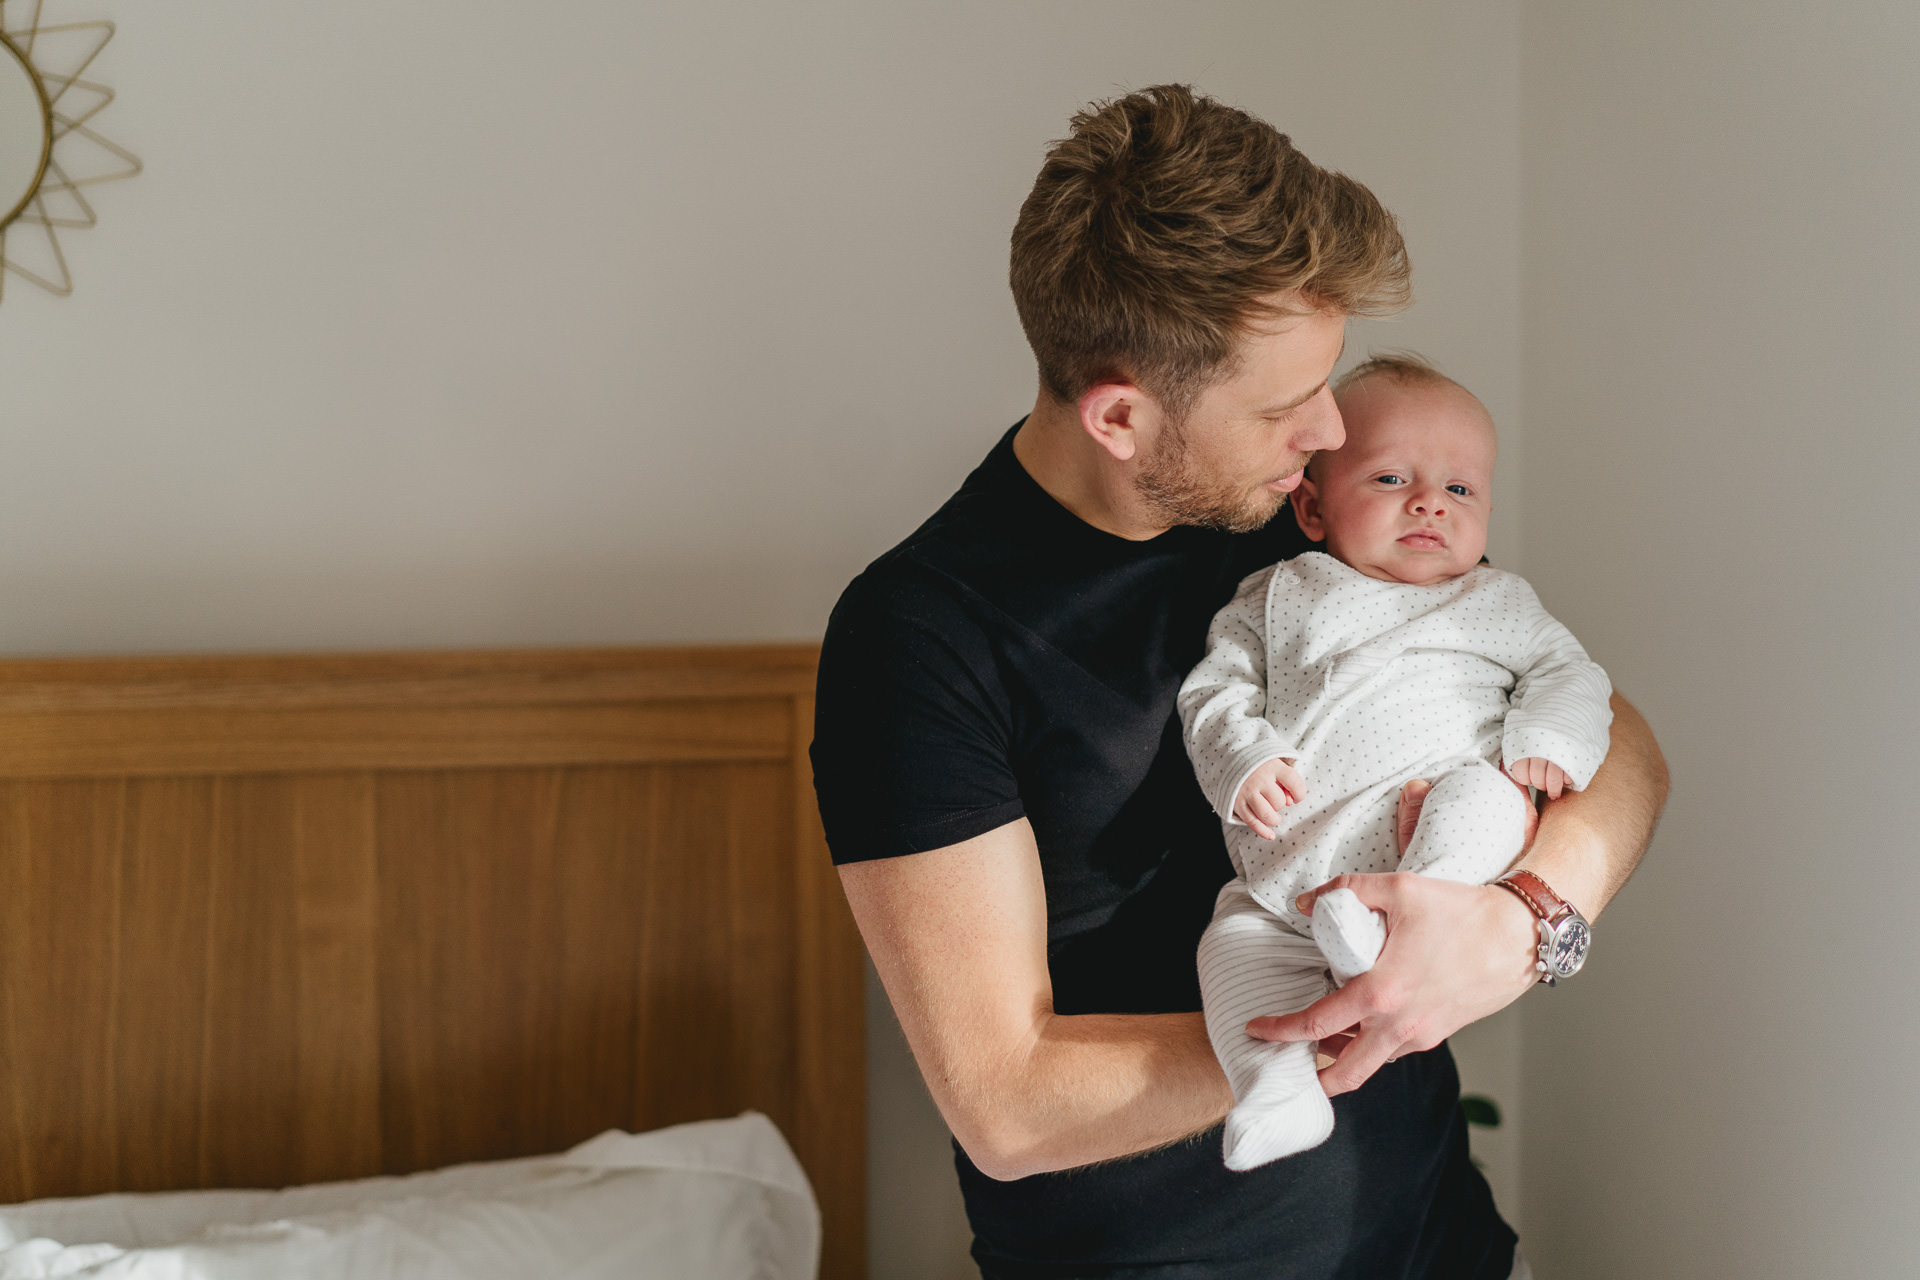 Dorset family photography: Dad kissing his baby son in a bedroom